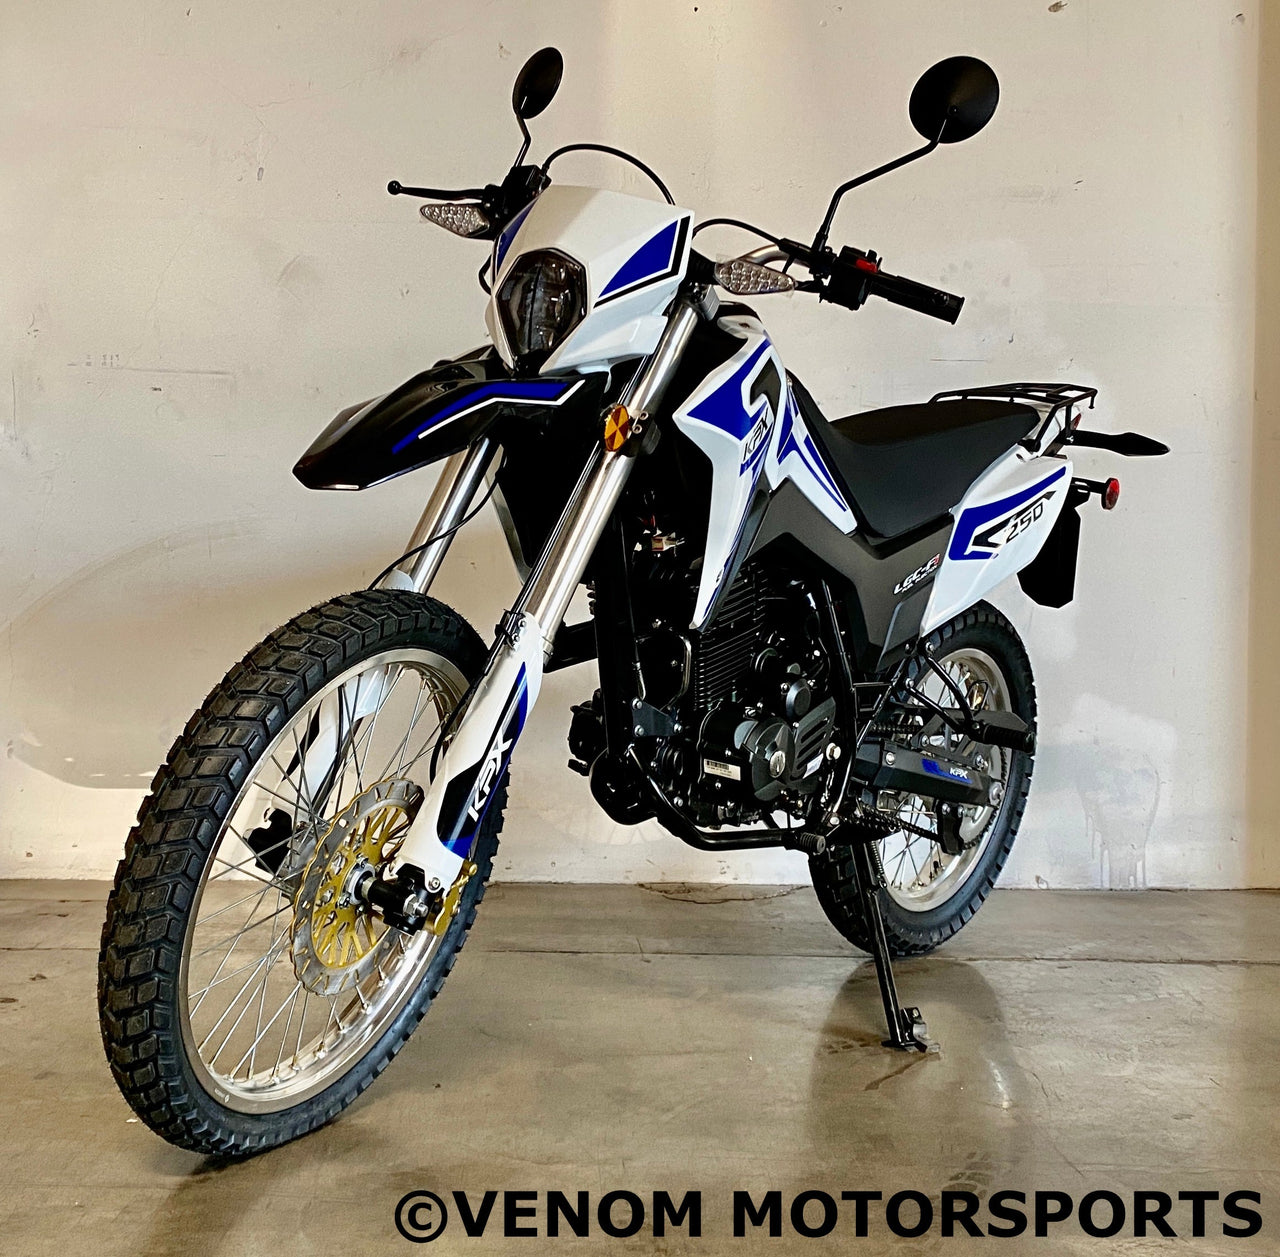 Lifan KPX 250 | 250cc Dual Sport Motorcycle | Fuel Injected | Street Legal